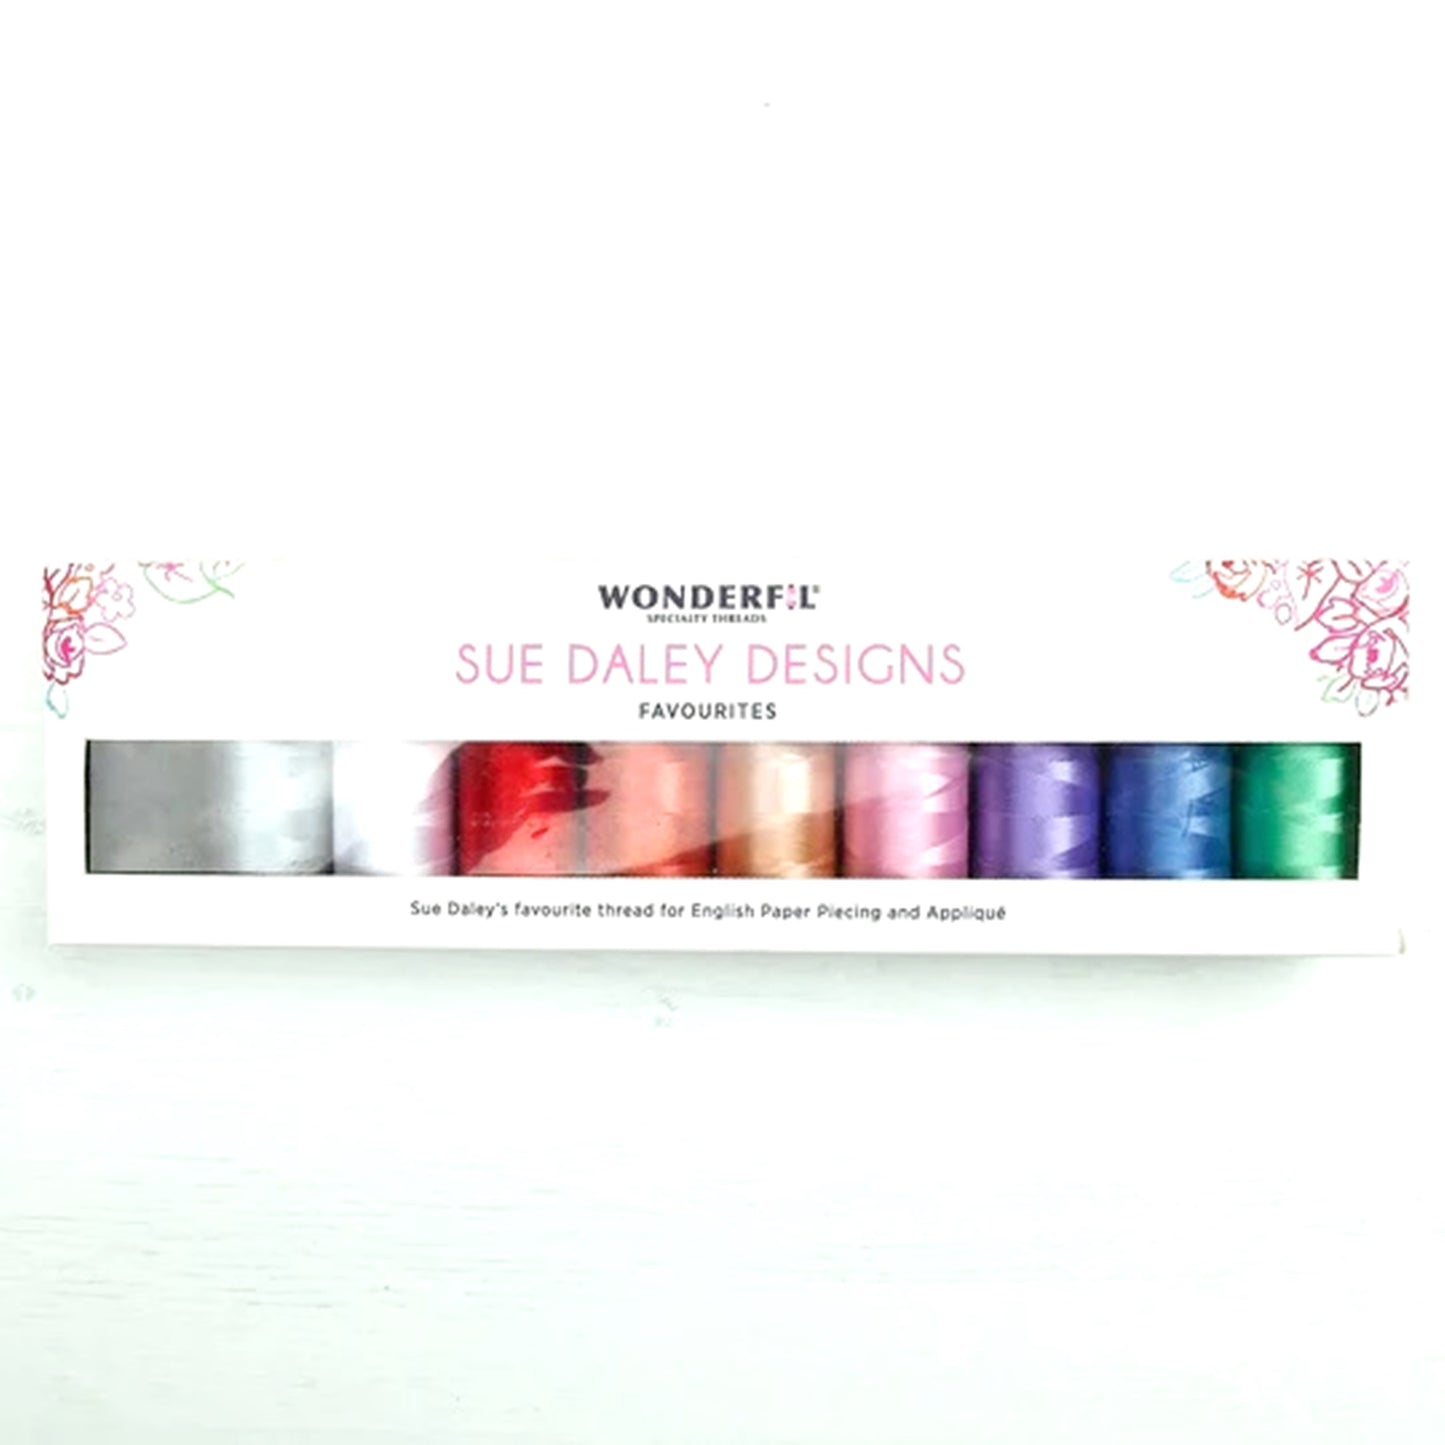 Wonderfil 80 weight thread pack 10 spools Sue Daley favourites English Paper Piecing